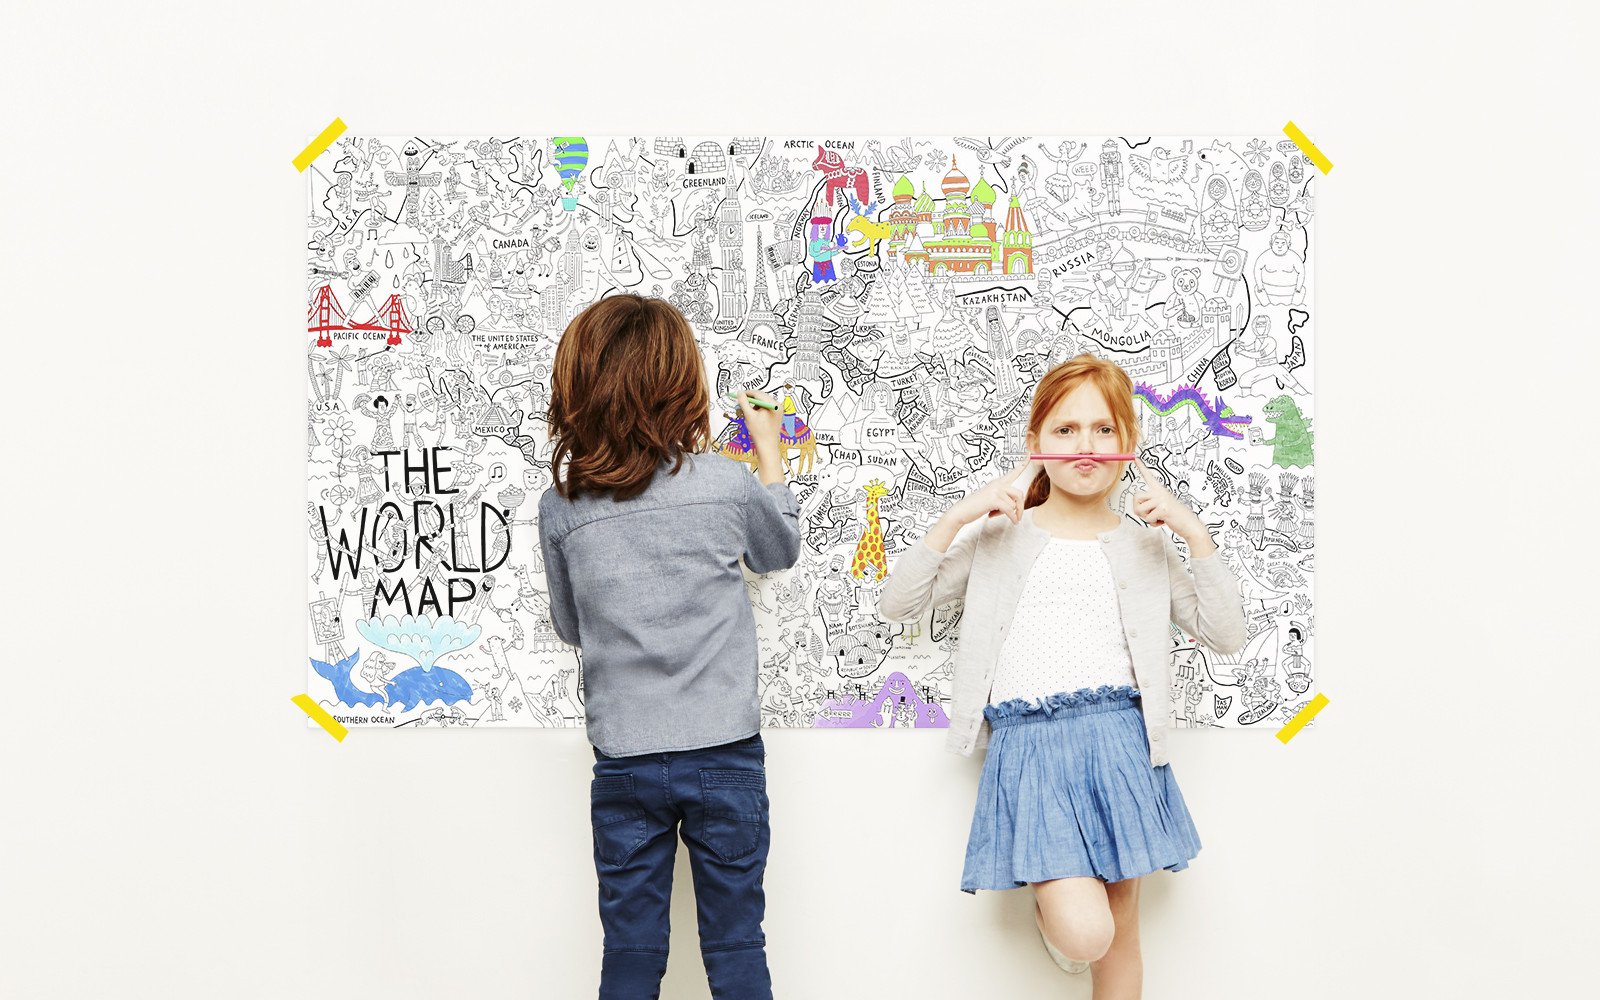 Screen-free activities for kids: A world map coloring poster